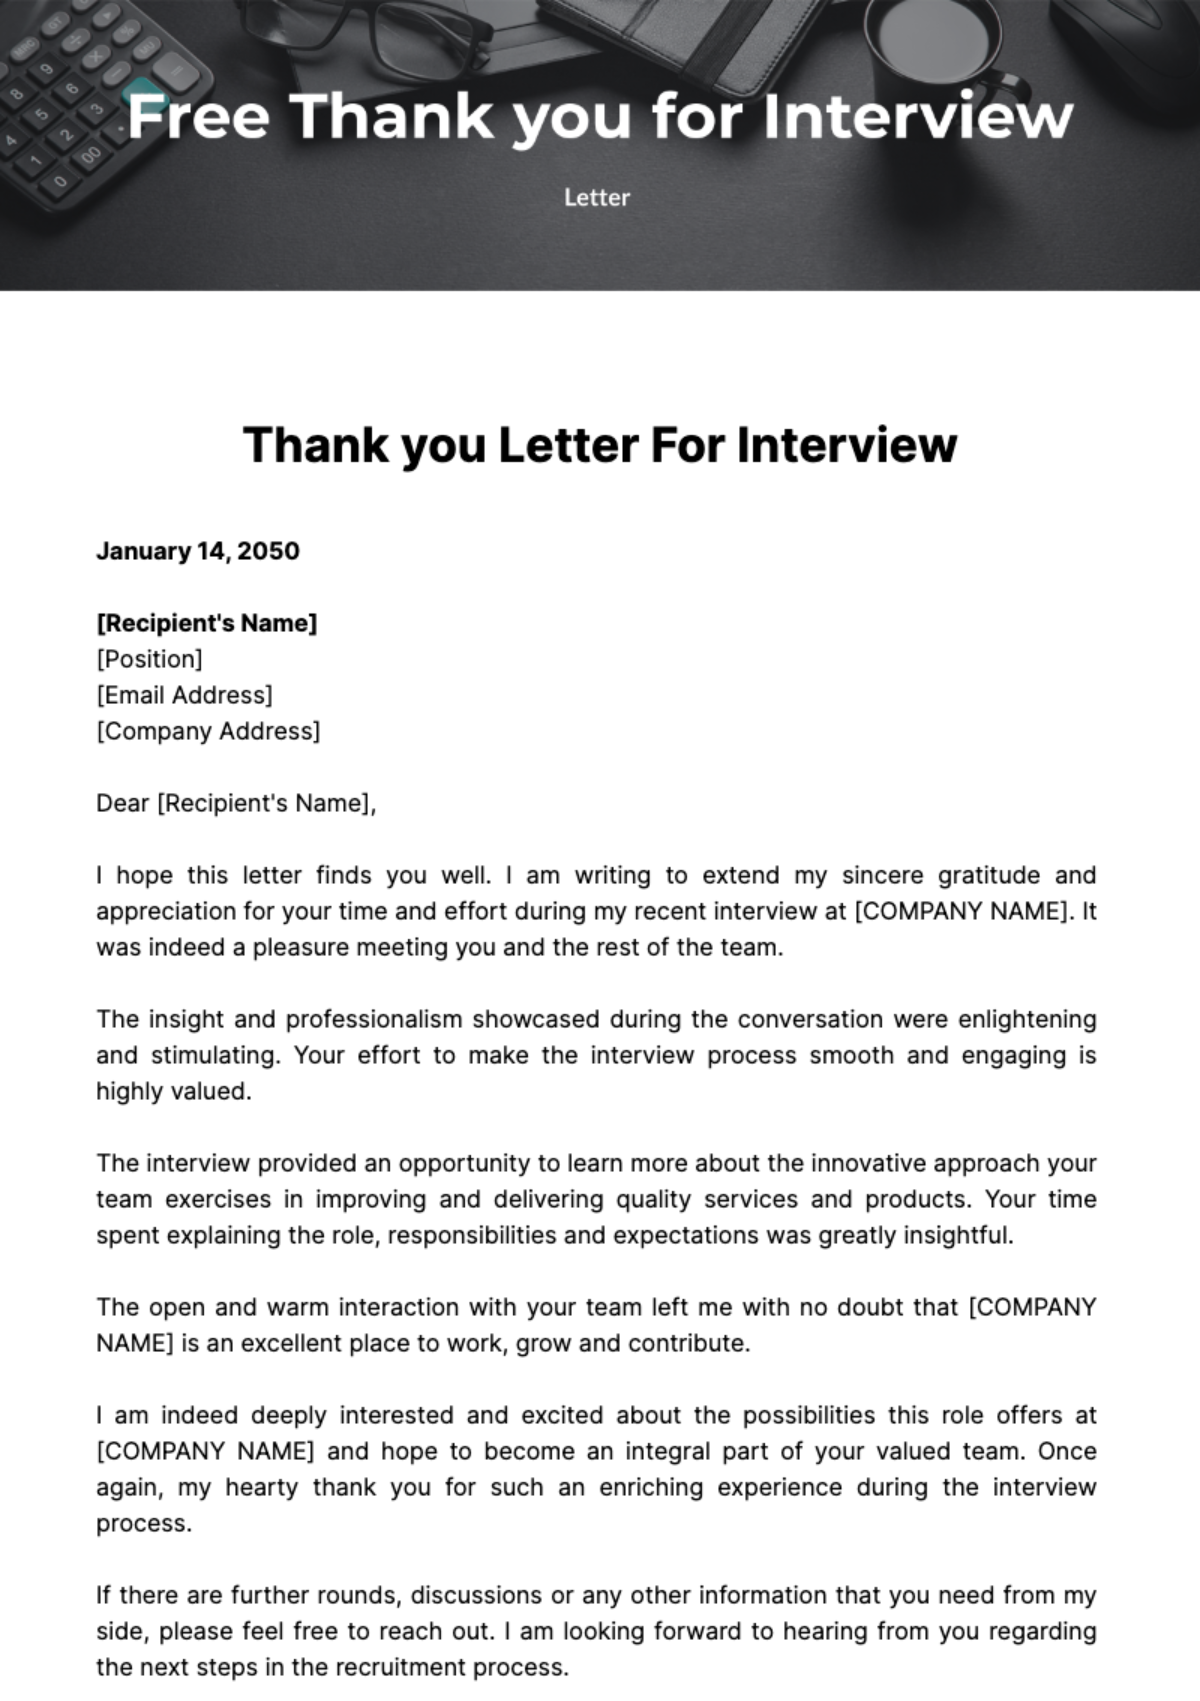 Free Thank you Letter for Interview Template